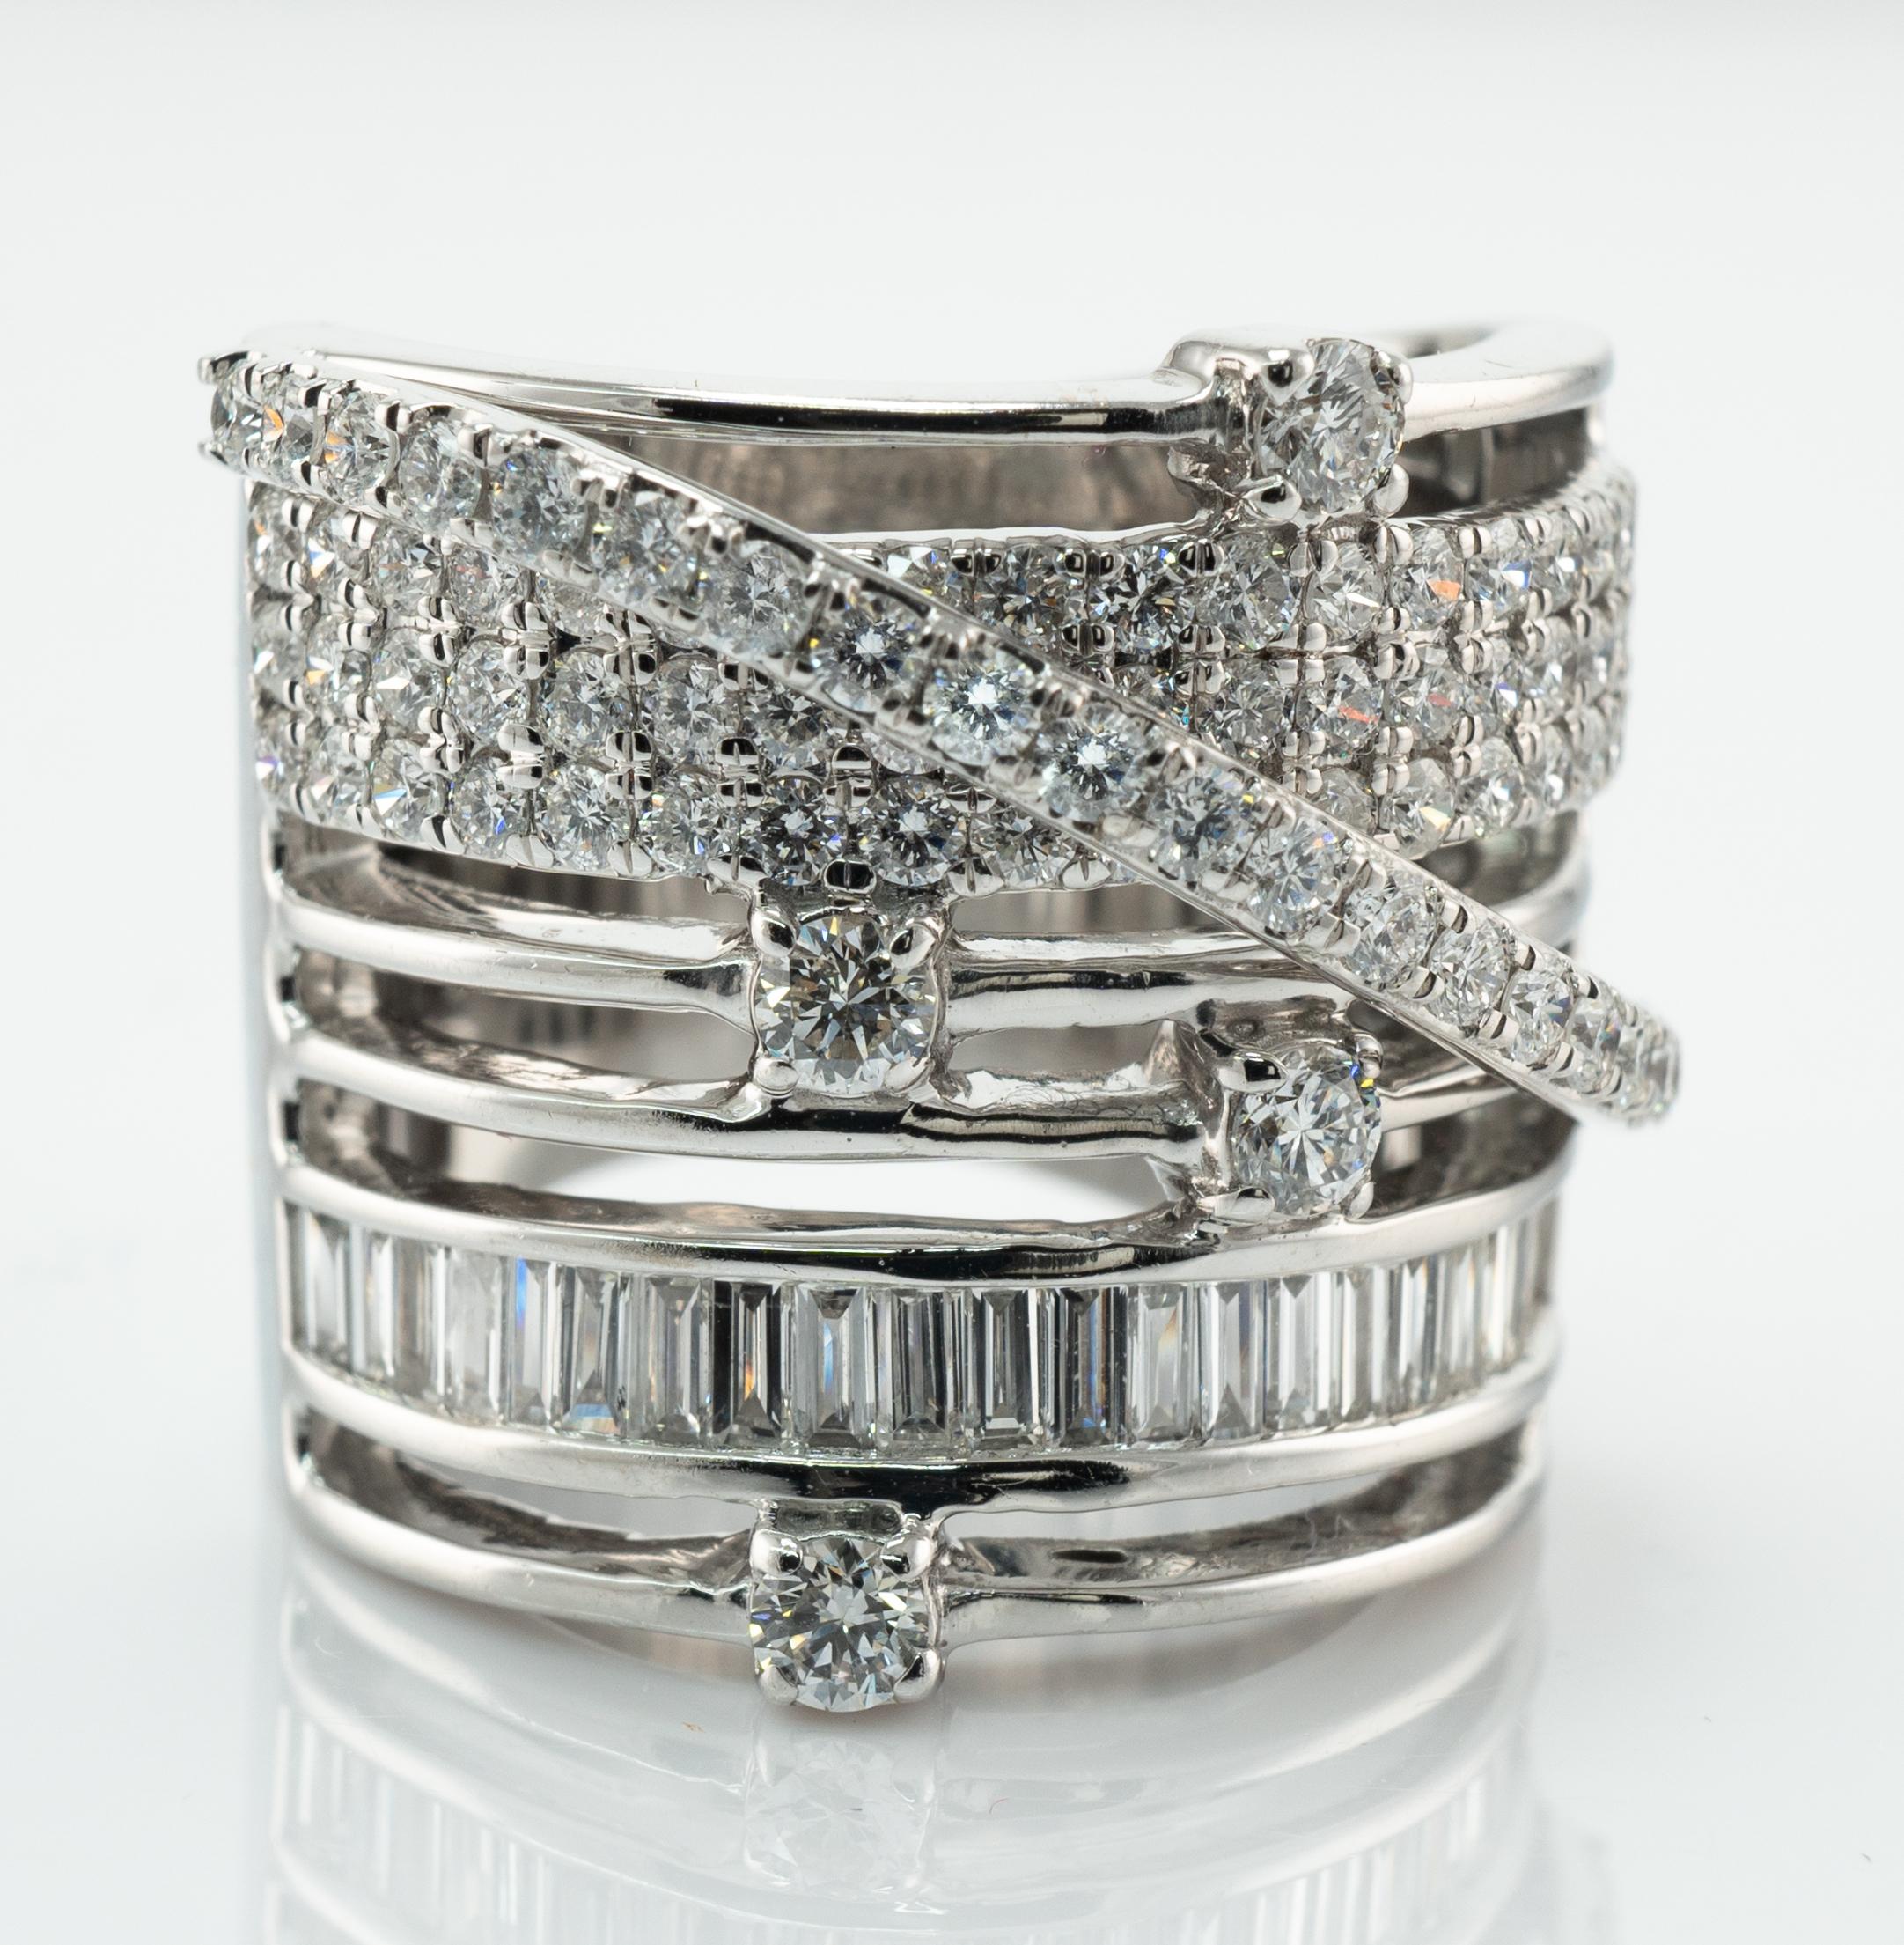 
Natural Diamond Ring Cigar Wide Band 14K White Gold 2.31ct TDW

This spectacular estate ring is finely crafted in solid 14K White Gold.
The cigar band holds 100 round diamonds and baguettes.
The total diamond weight is 2.31cts of VS2-SI1 clarity